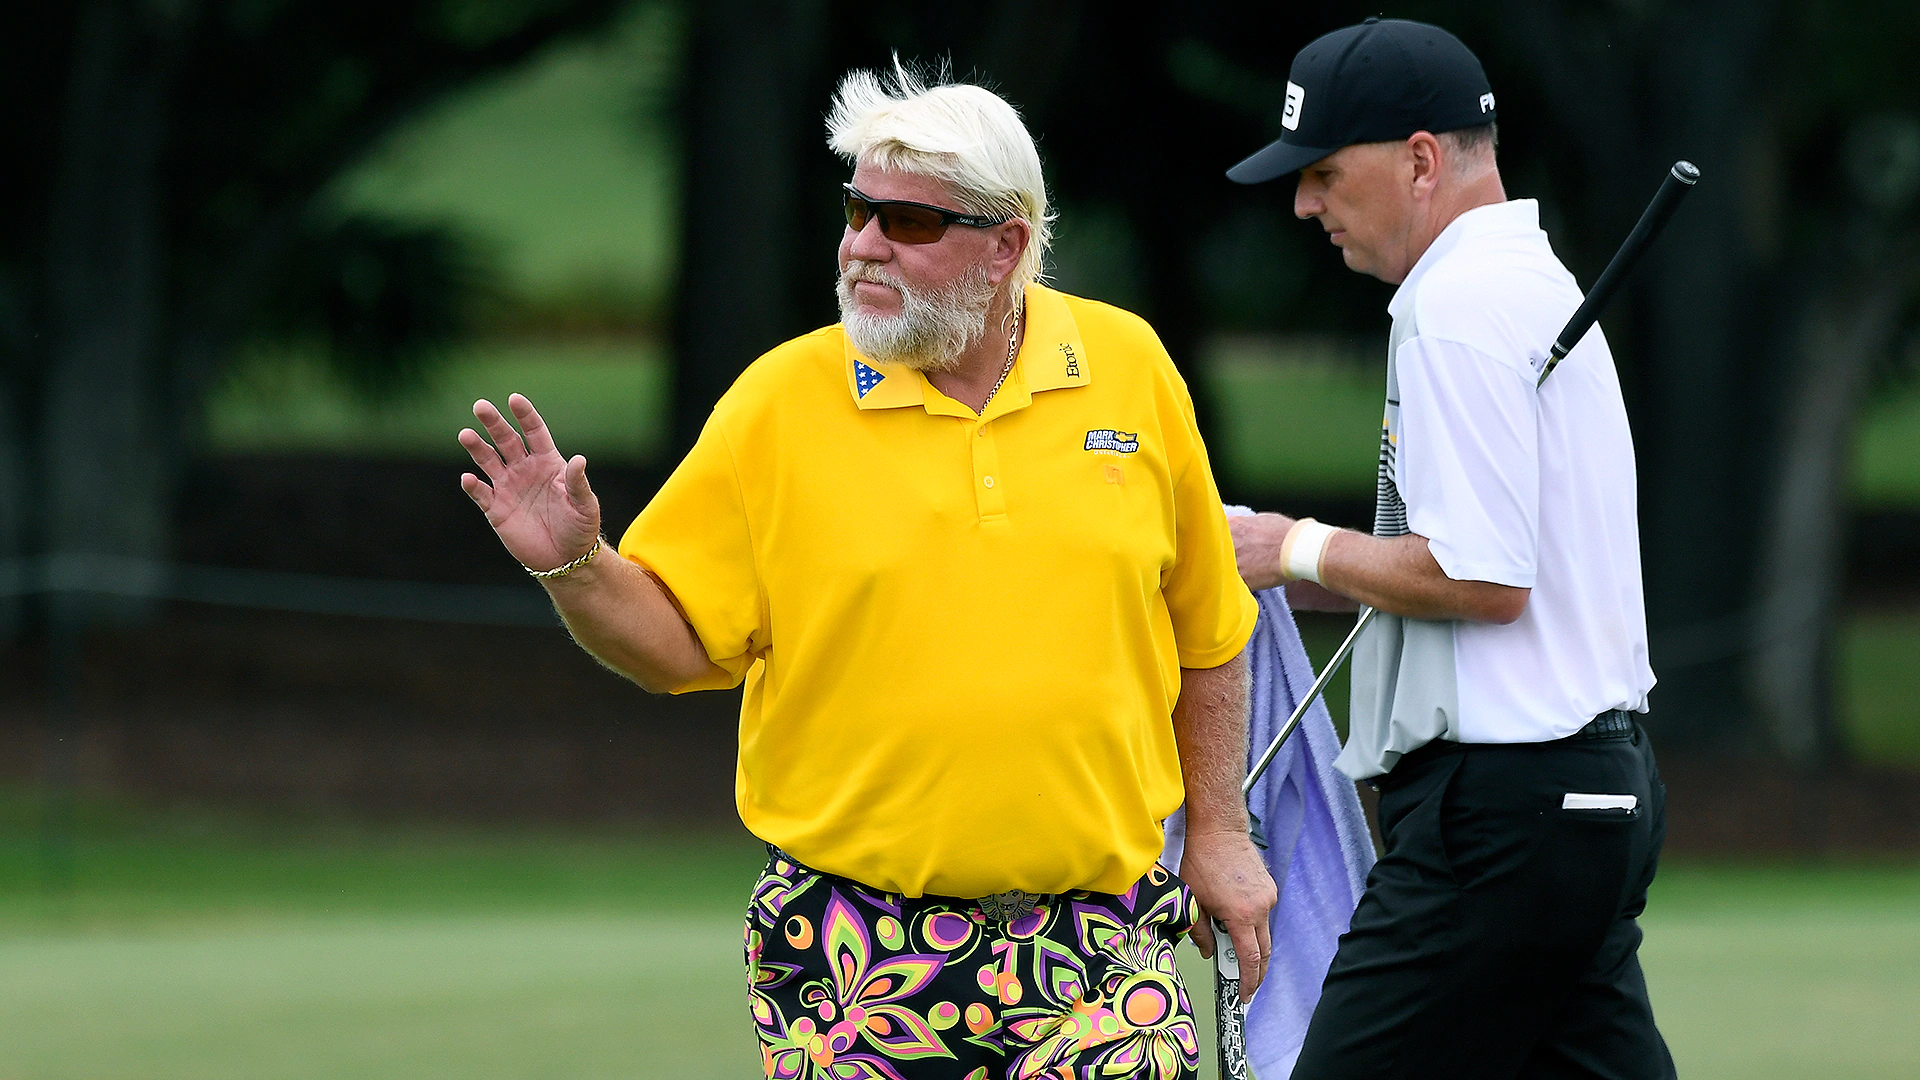 John Daly, Jim Furyk fire 64s to share lead on PGA Tour Champions